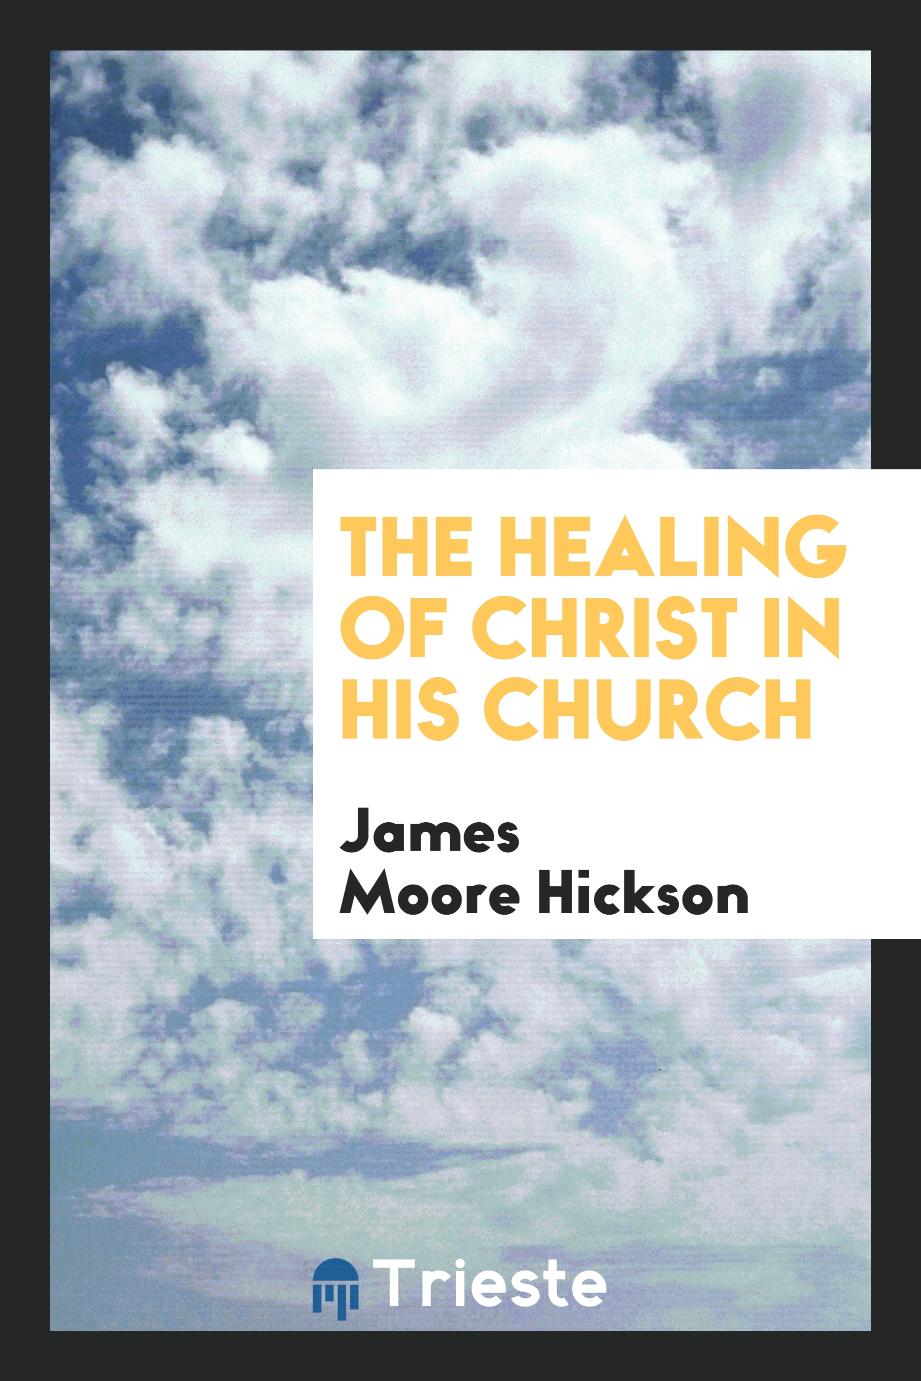 The Healing of Christ in His Church